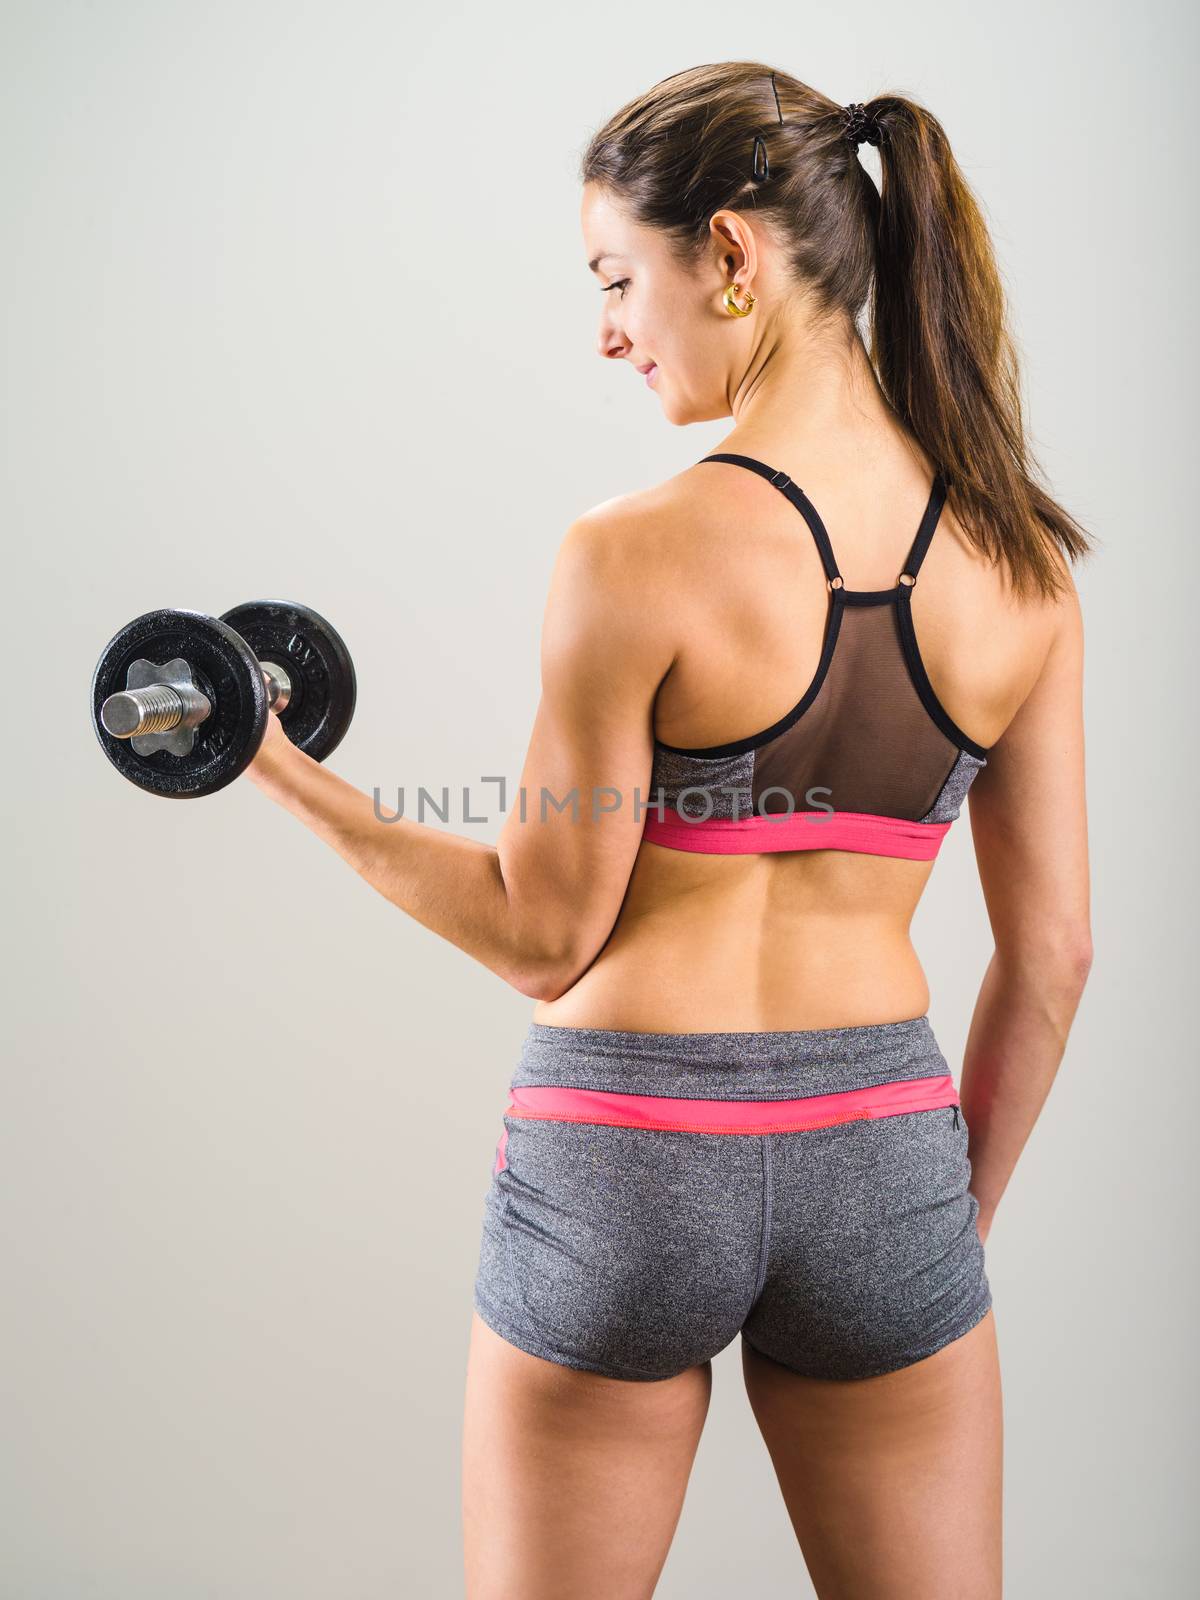 Sexy young woman doing dumbbell curl by sumners